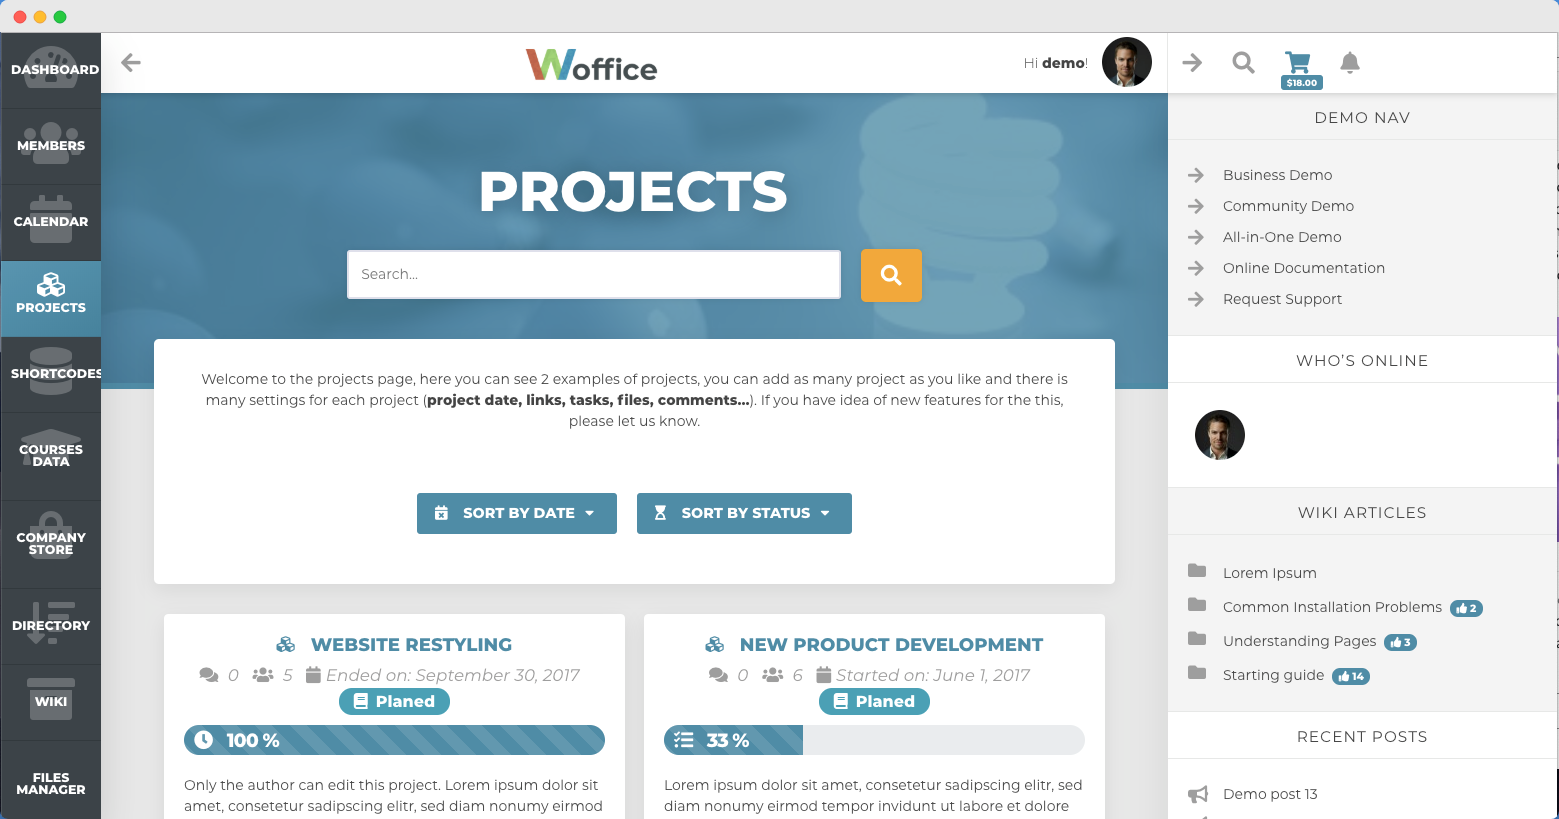 
Woffice: all-in-one WordPress Intranet Theme
